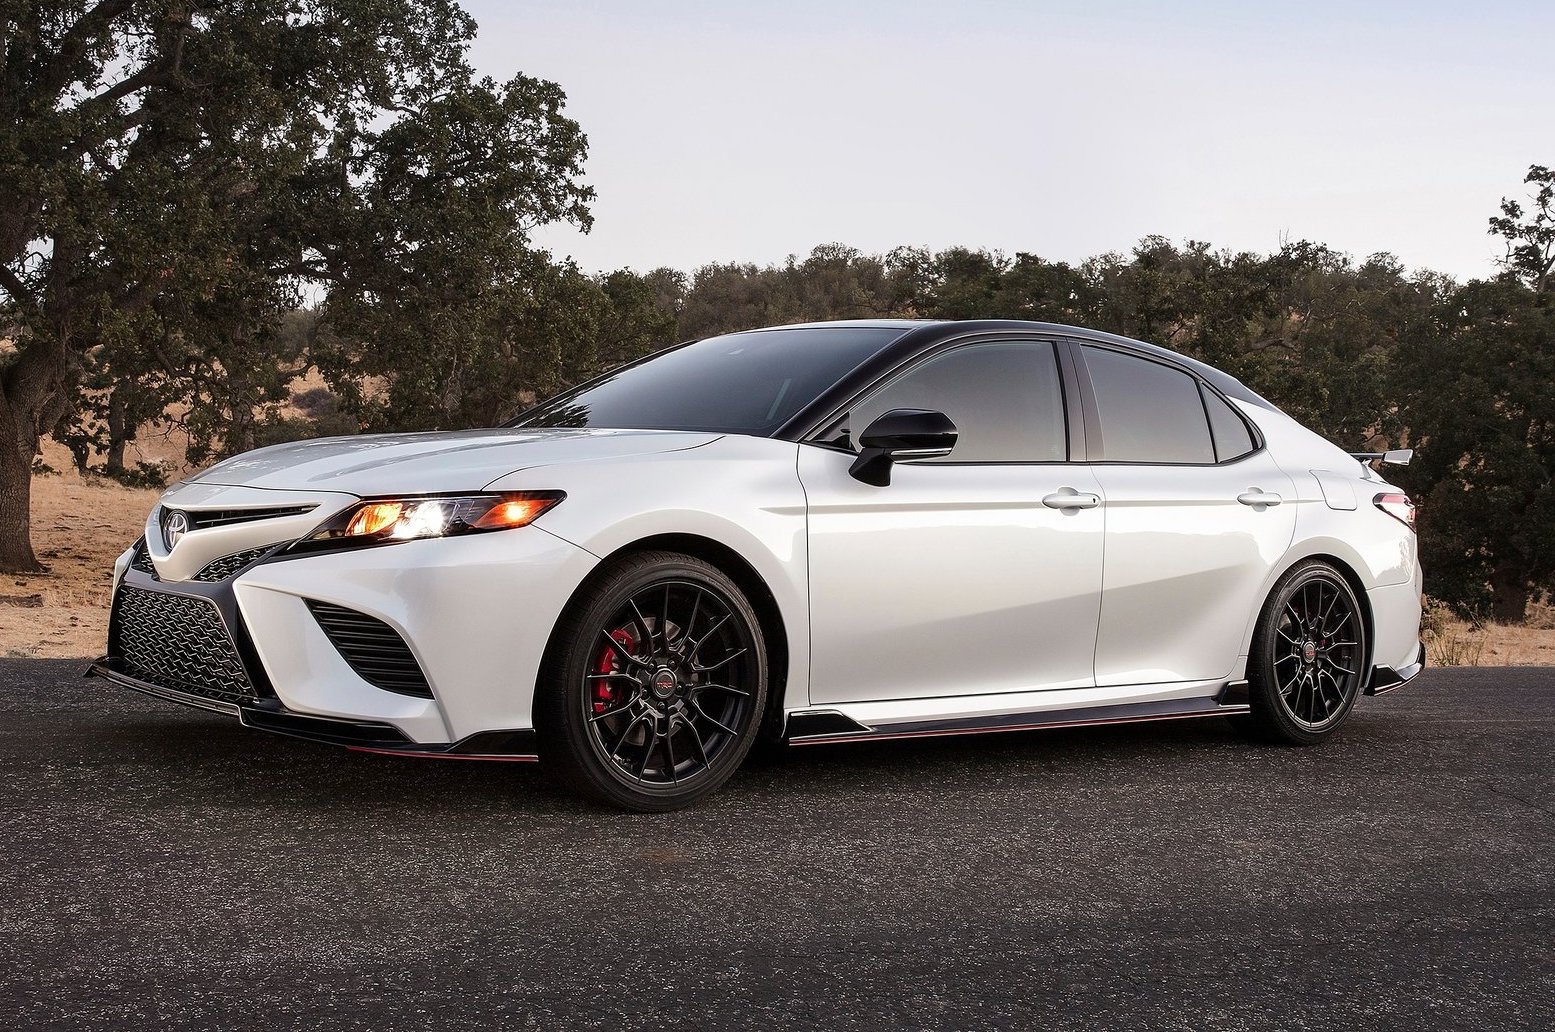 2020 Toyota Camry TRD shows racy appeal | PerformanceDrive